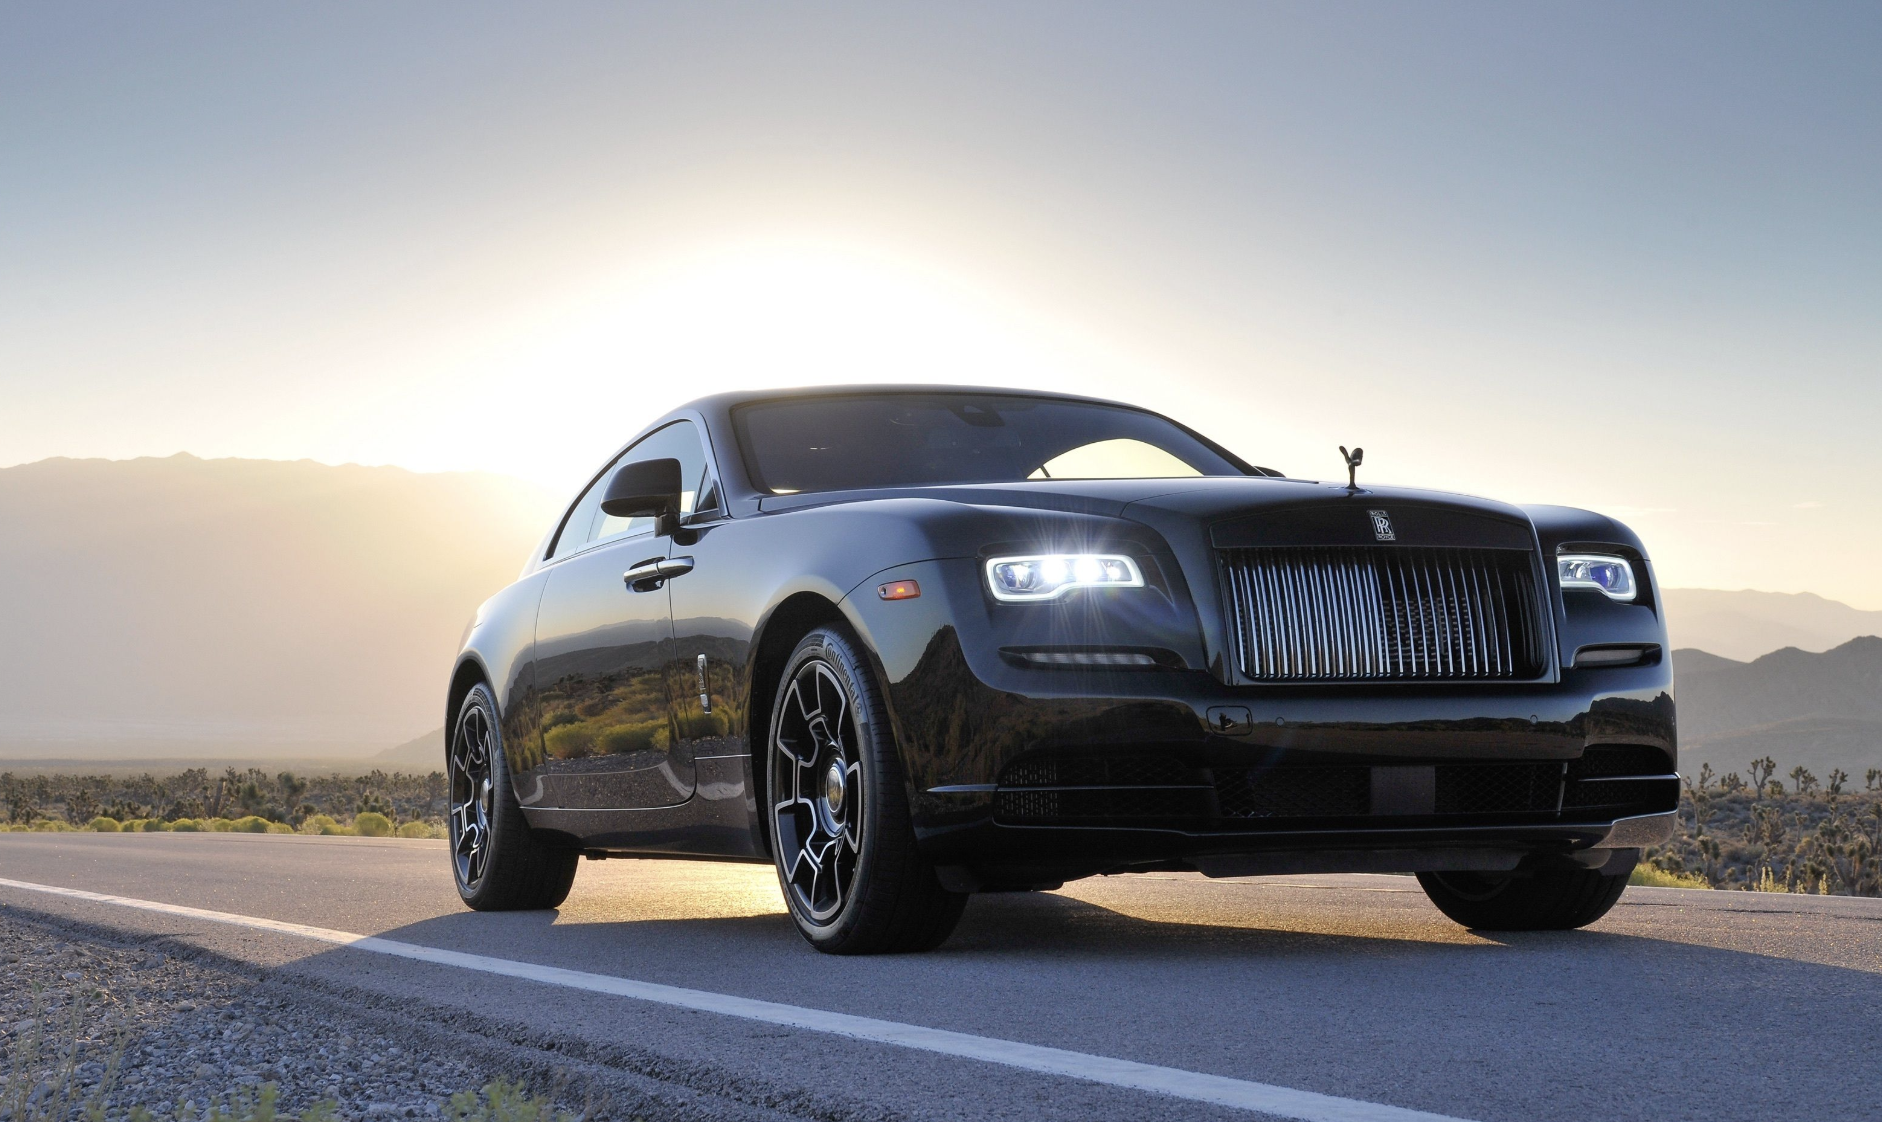 Turbocharged 810HP Rolls Royce Wraith Does 060 in 44s Might Be Fastest  Yet  TechEBlog